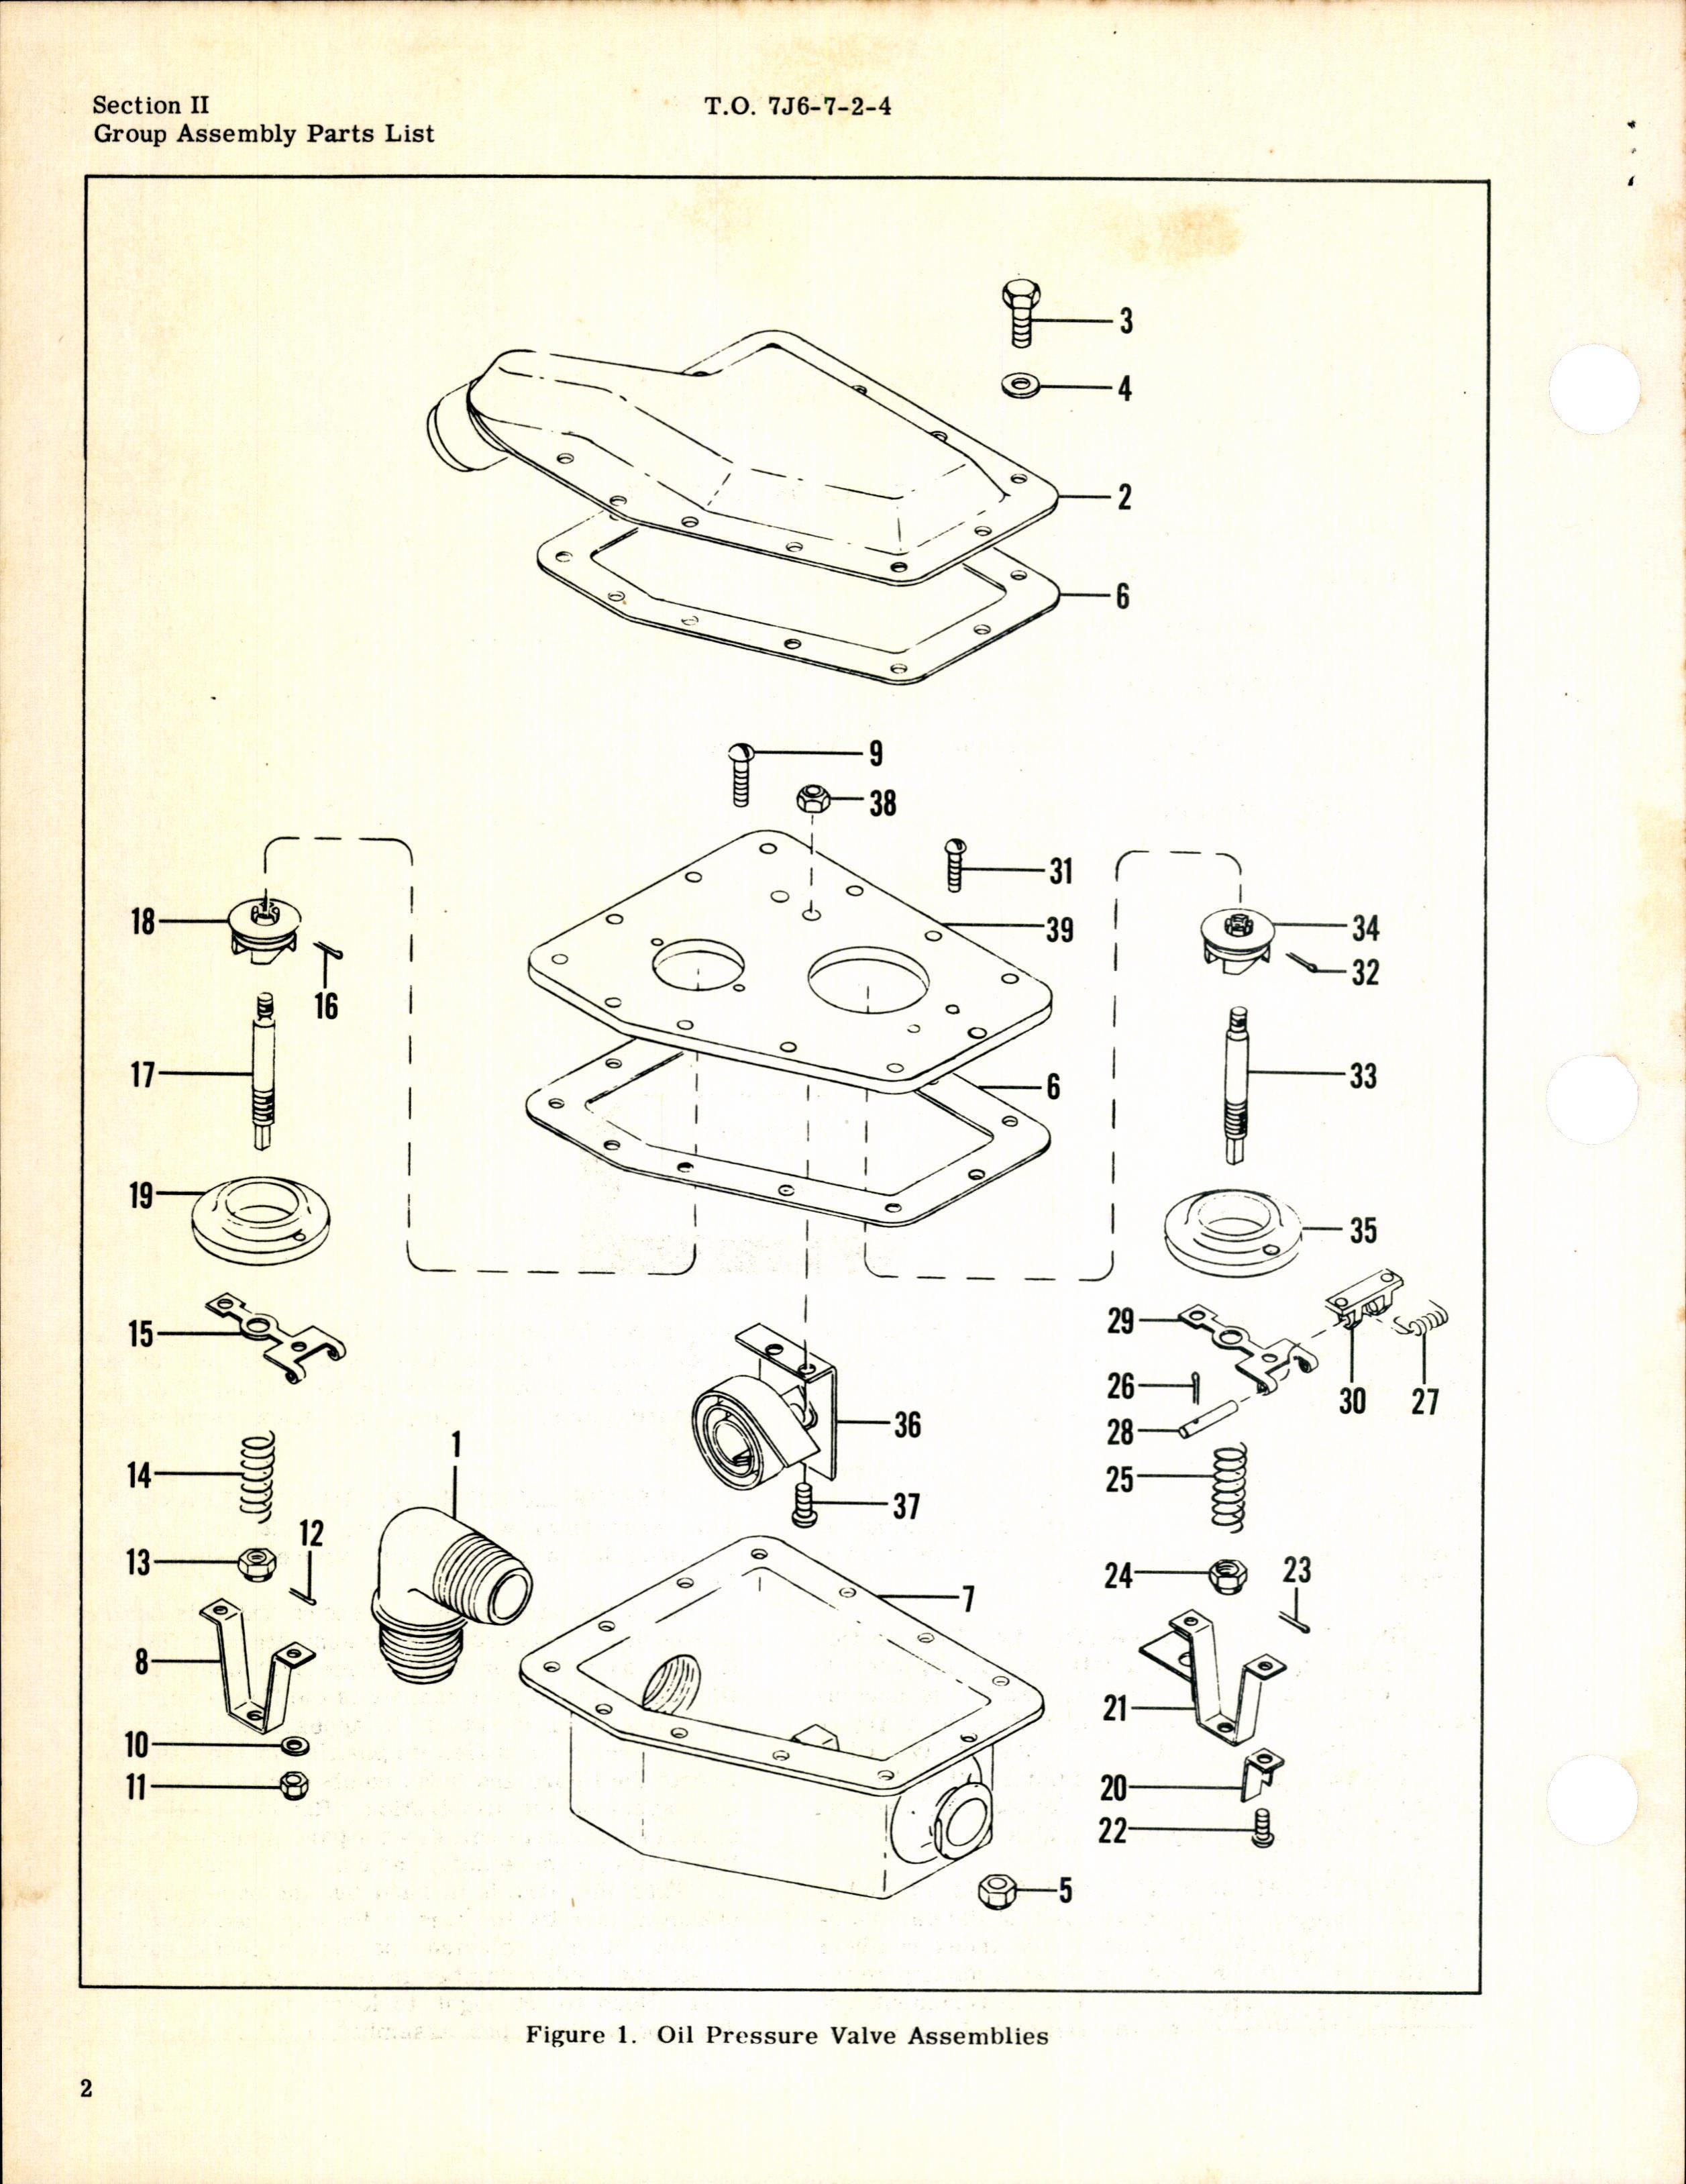 Sample page 4 from AirCorps Library document: Illustrated Parts Breakdown for Oil Pressure Valve 15-24641-20 and -21